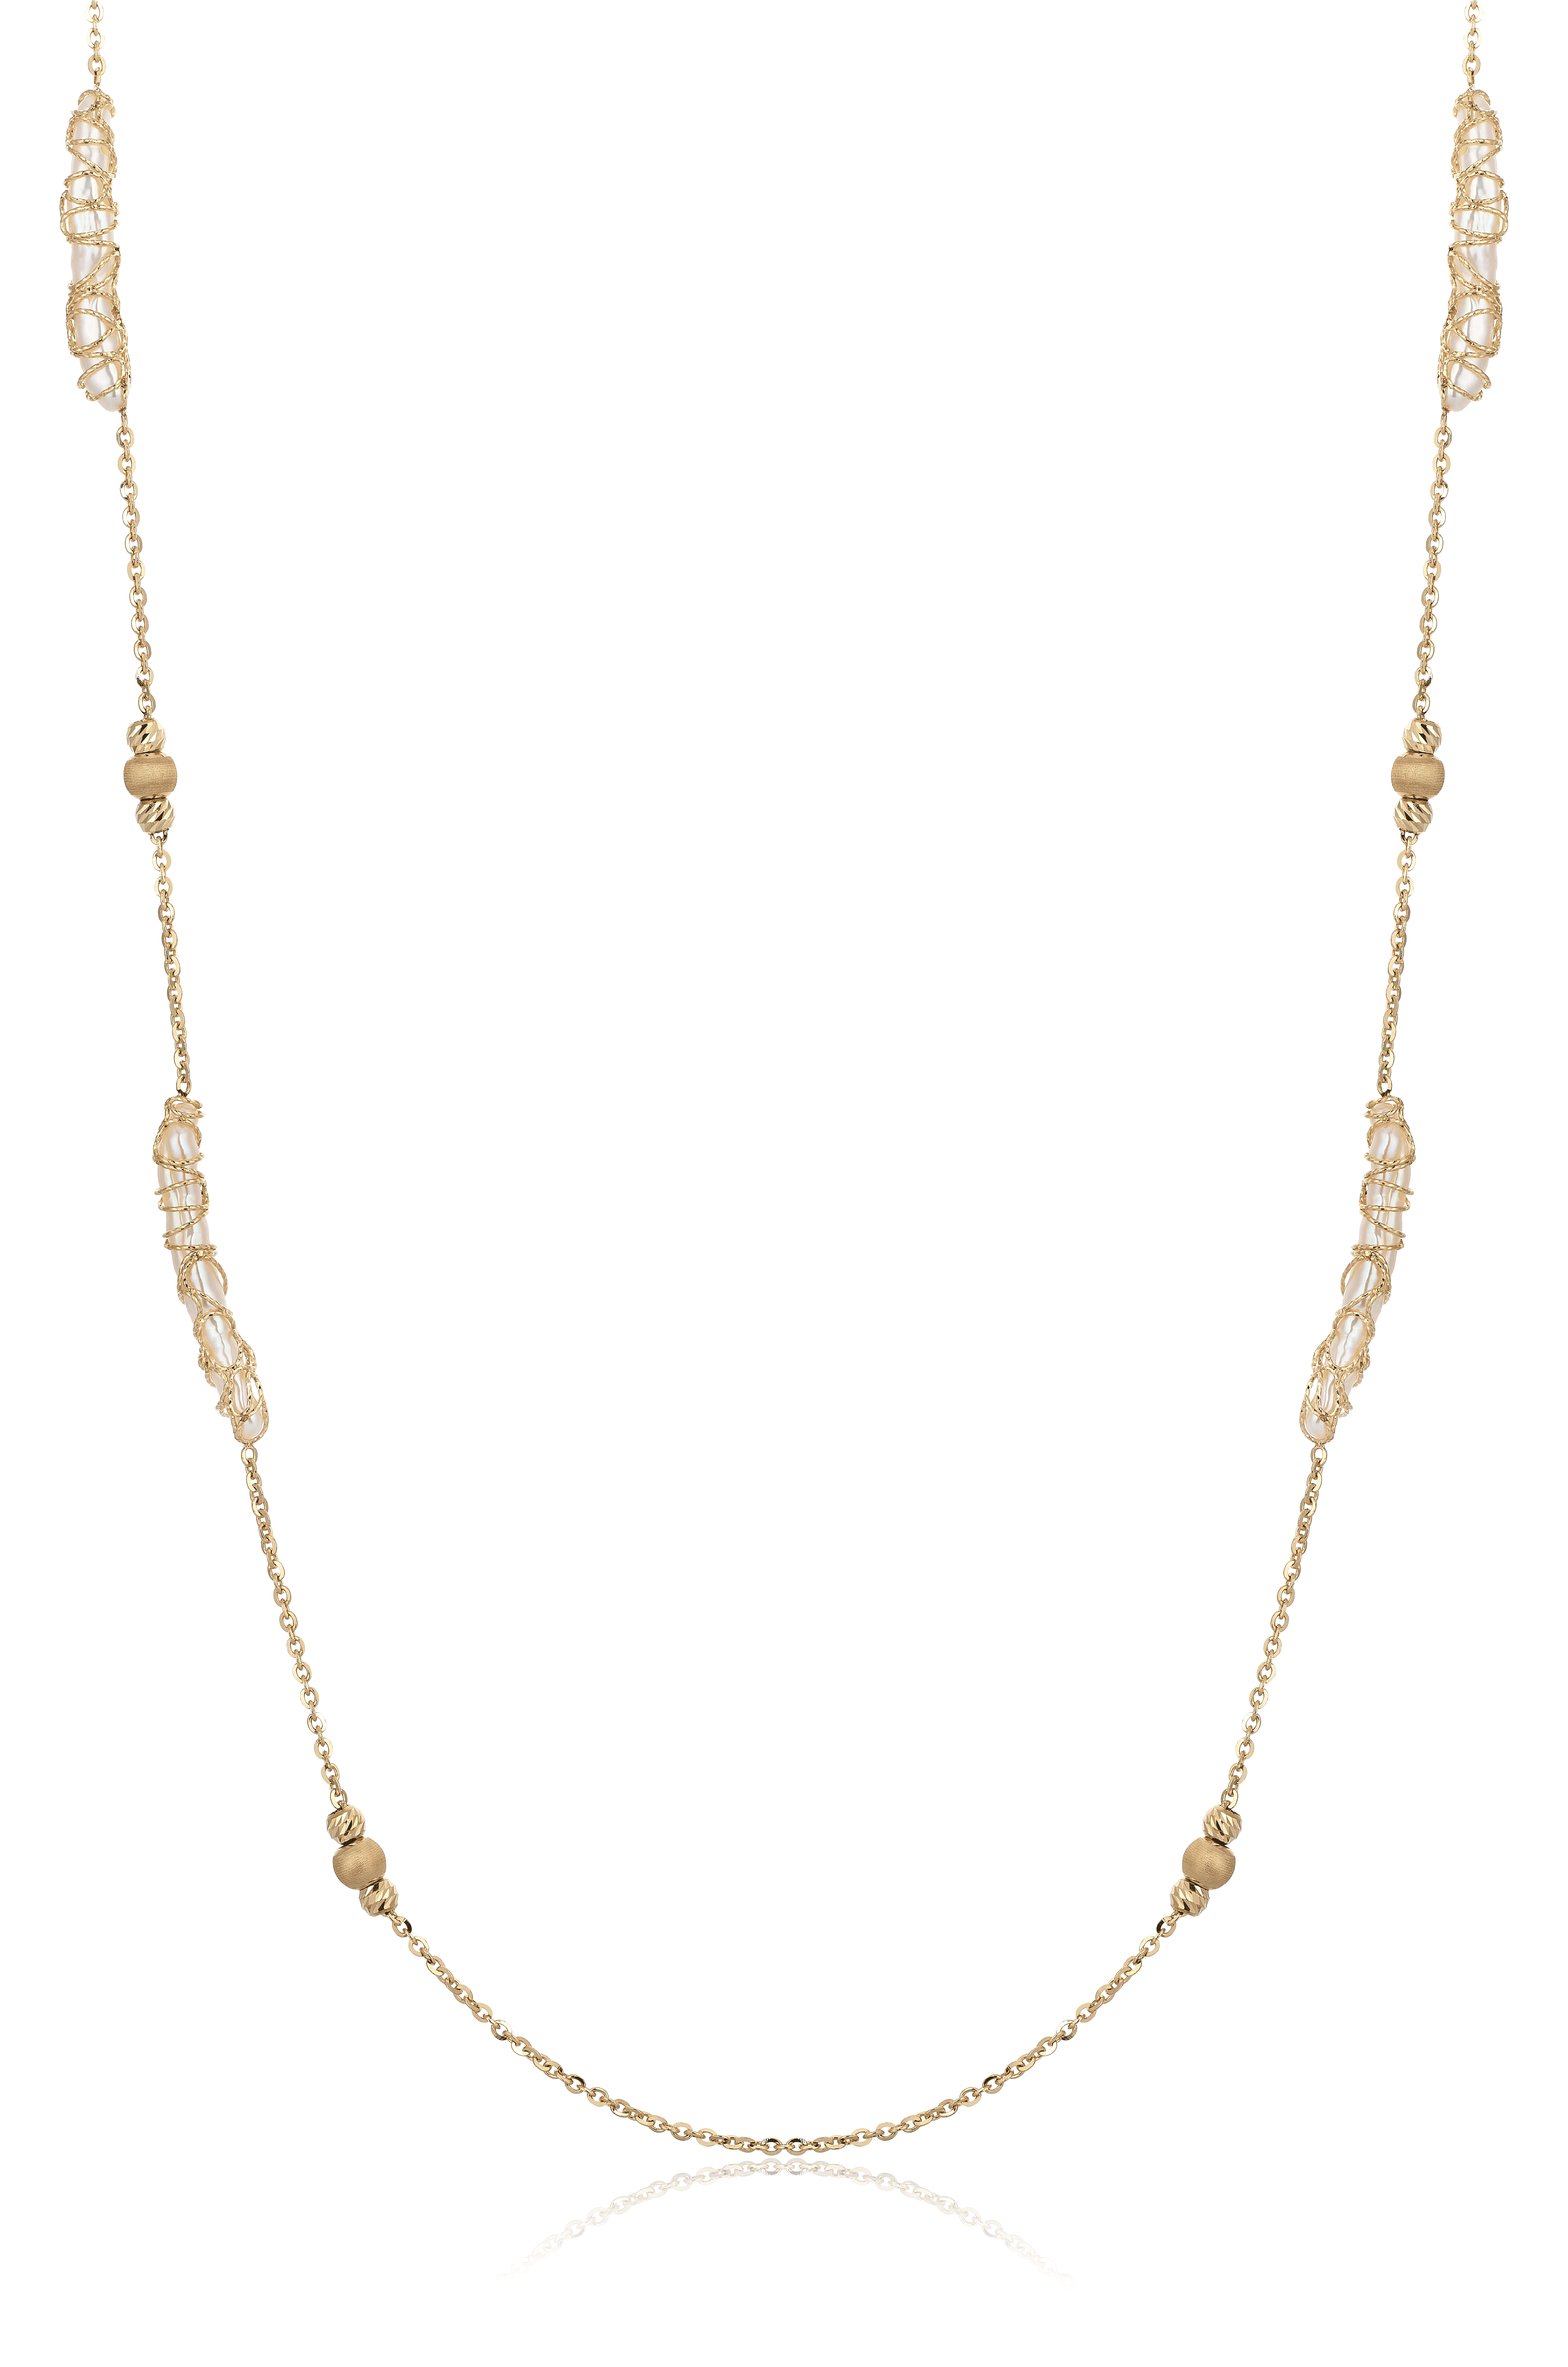 Symphony of Pearl Line Necklace - 1